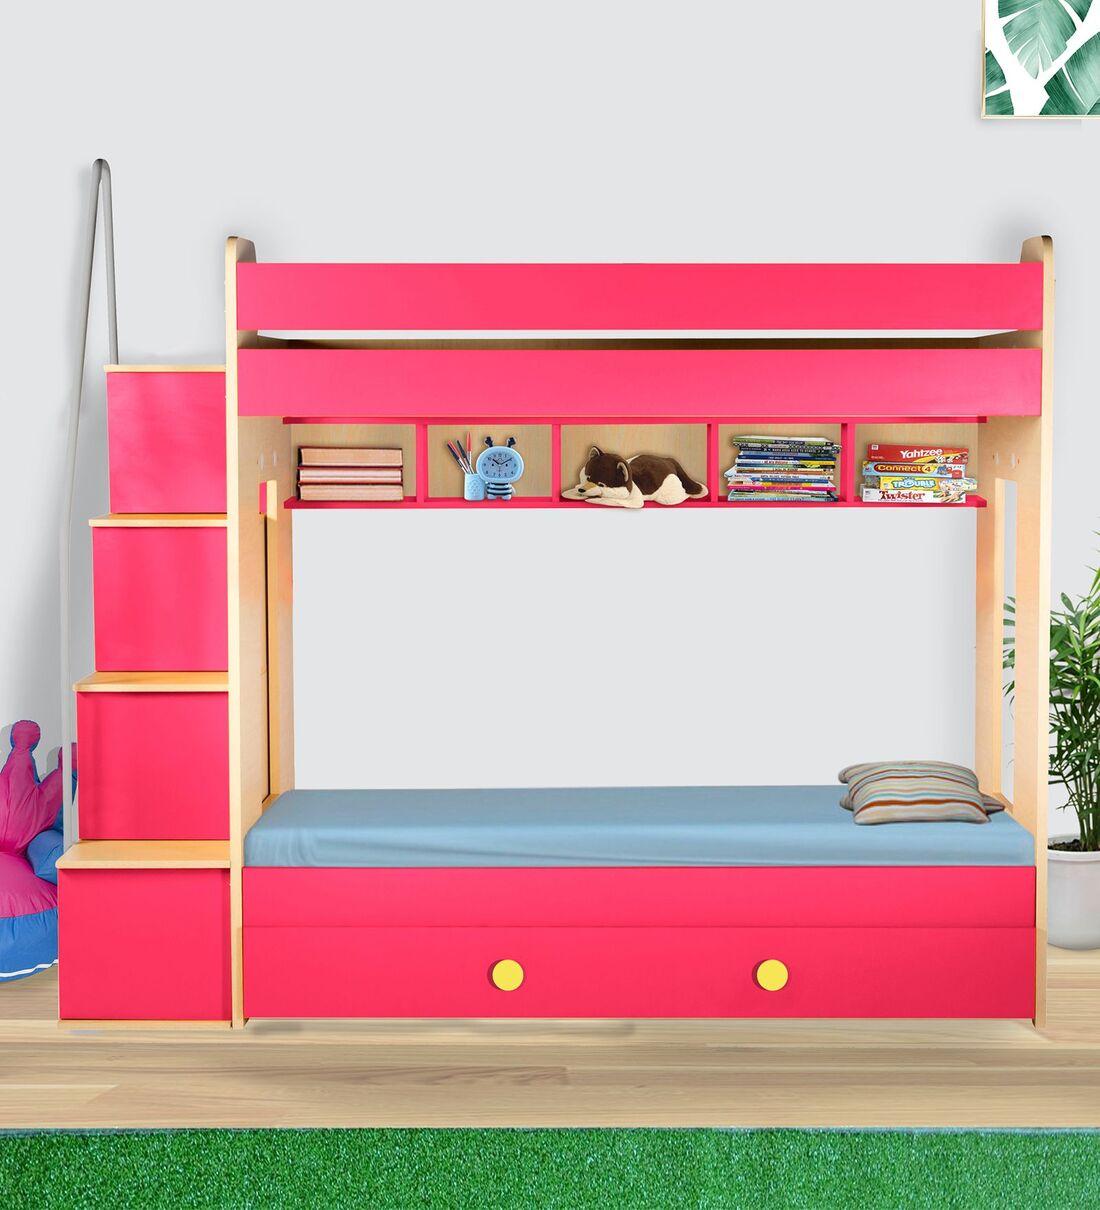 Buy Multi Flexi Bunk Bed In Pink Colour With Drawer Storage At 10 Off By Yipi Online Pepperfry 1790